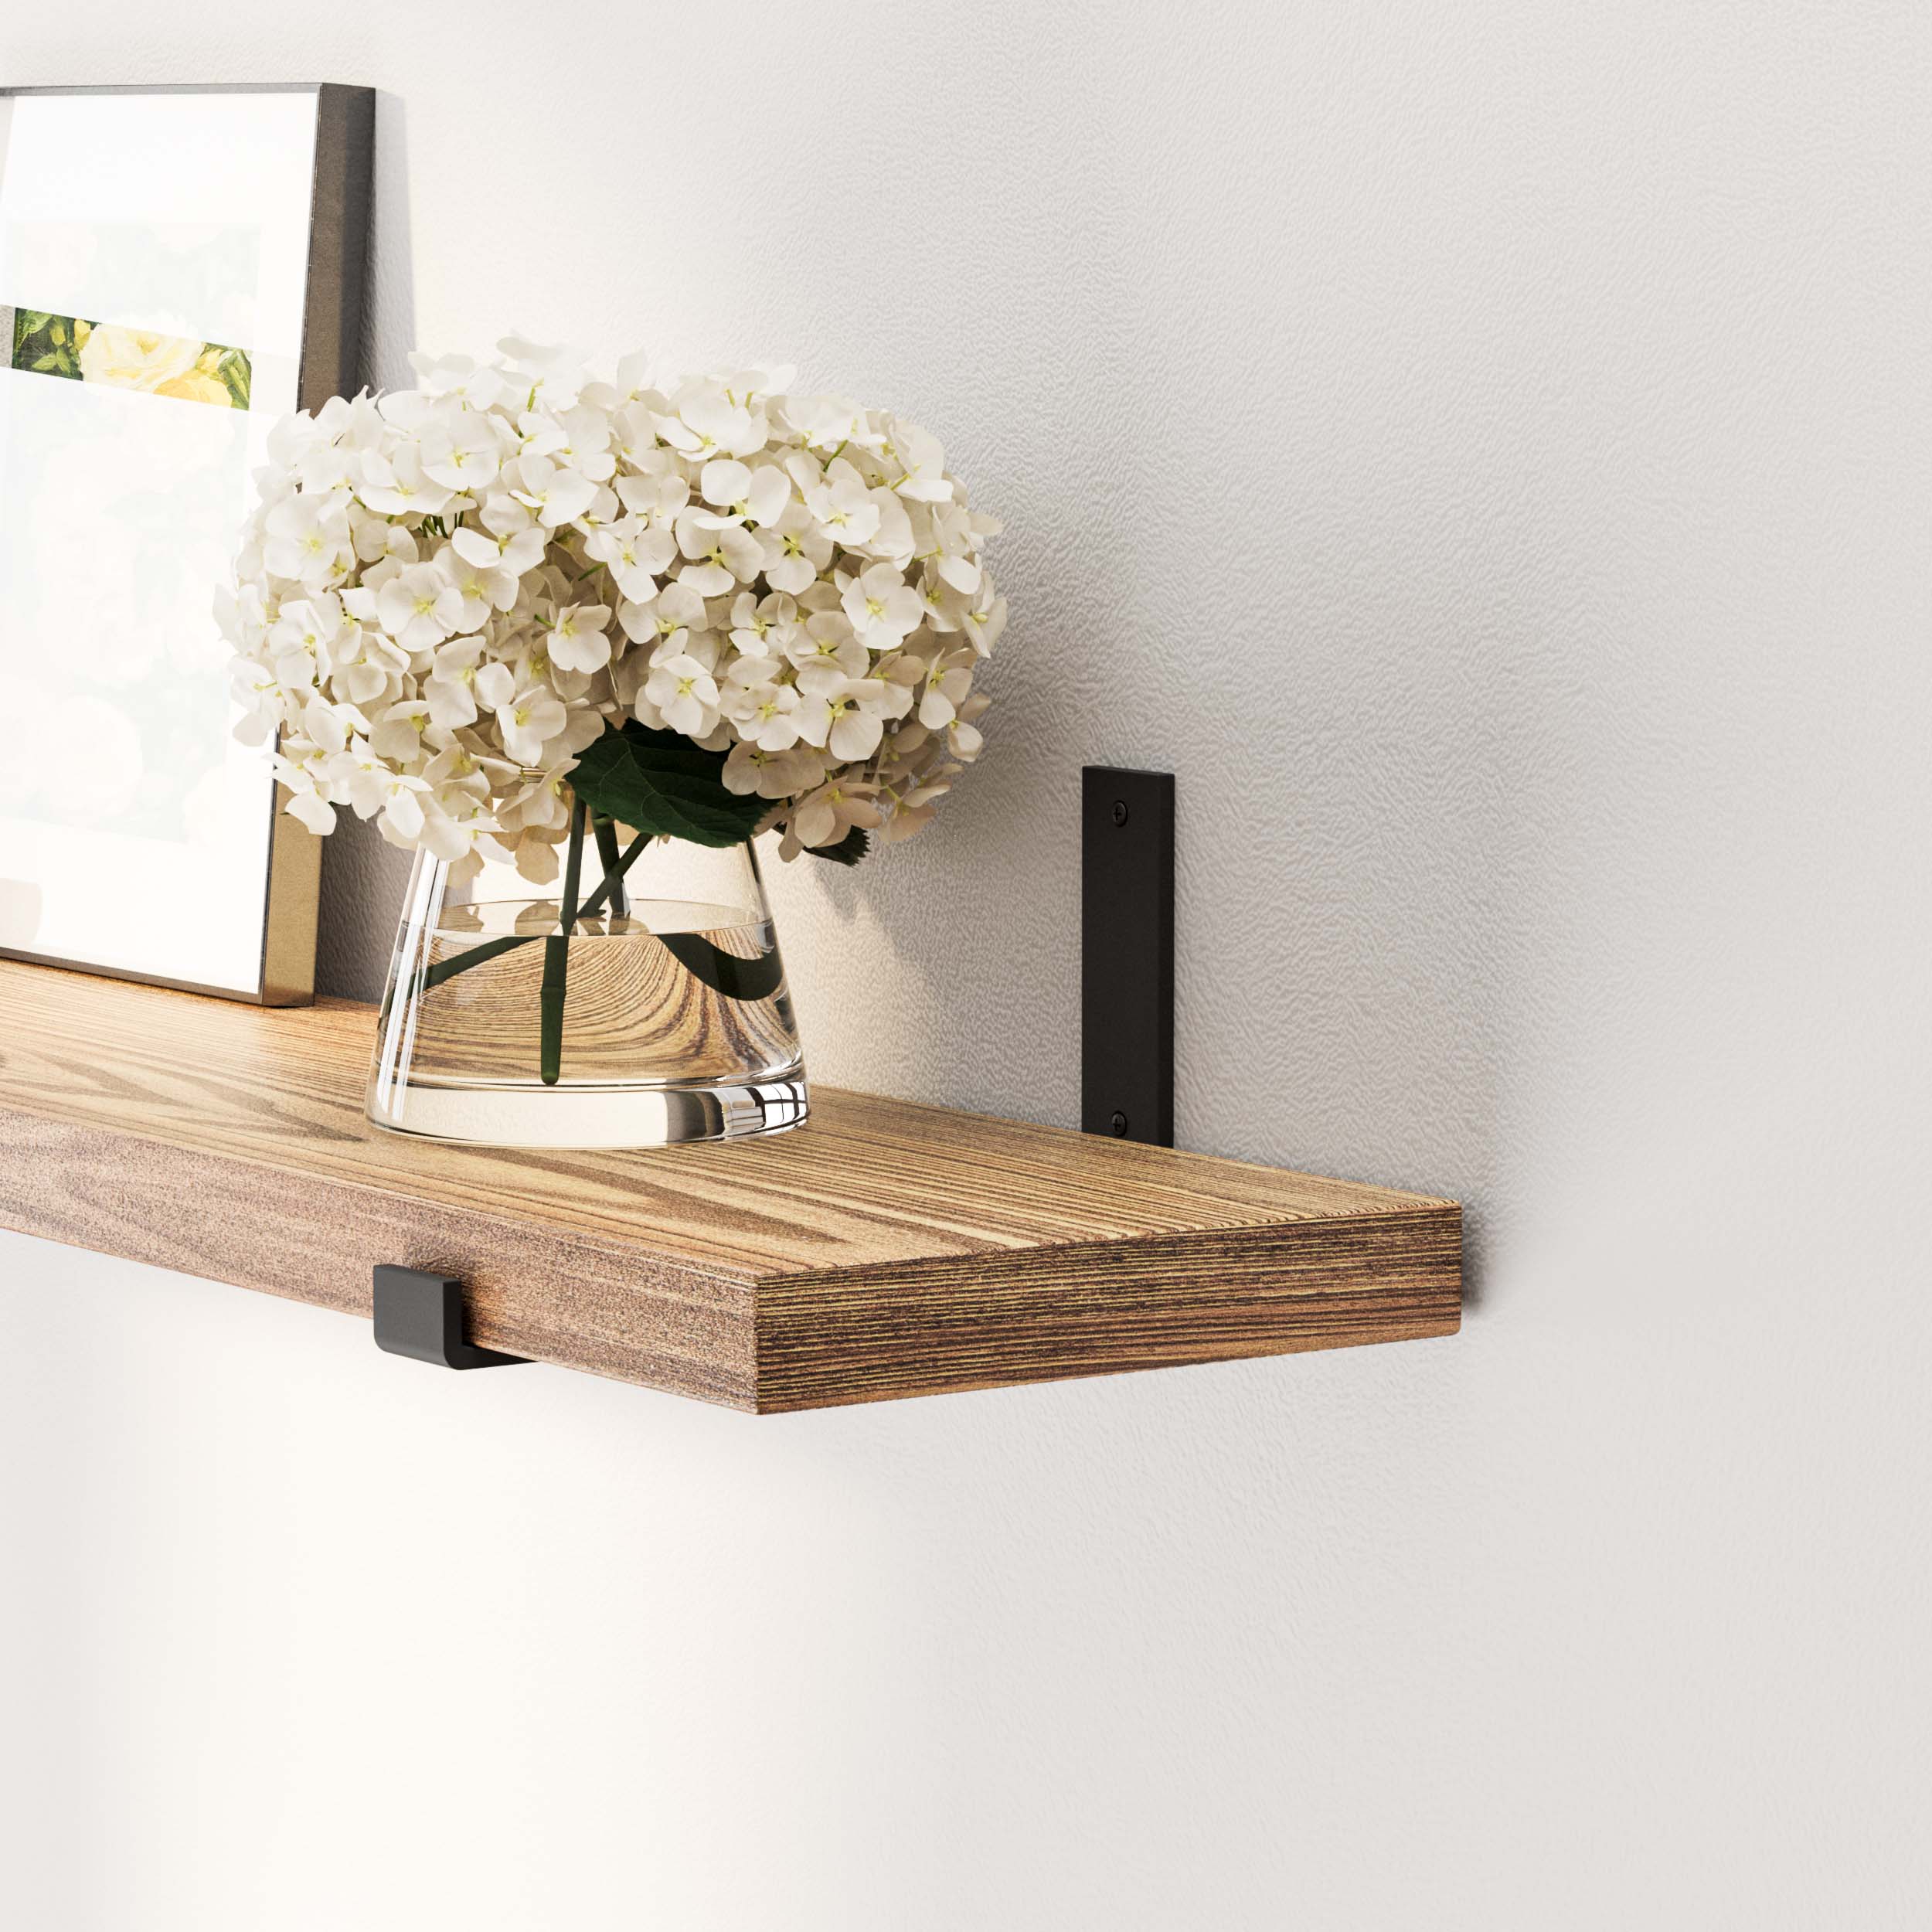 Close-up of a wood shelf burnt holding a vase with white flowers and a framed picture, showcasing elegant simplicity.